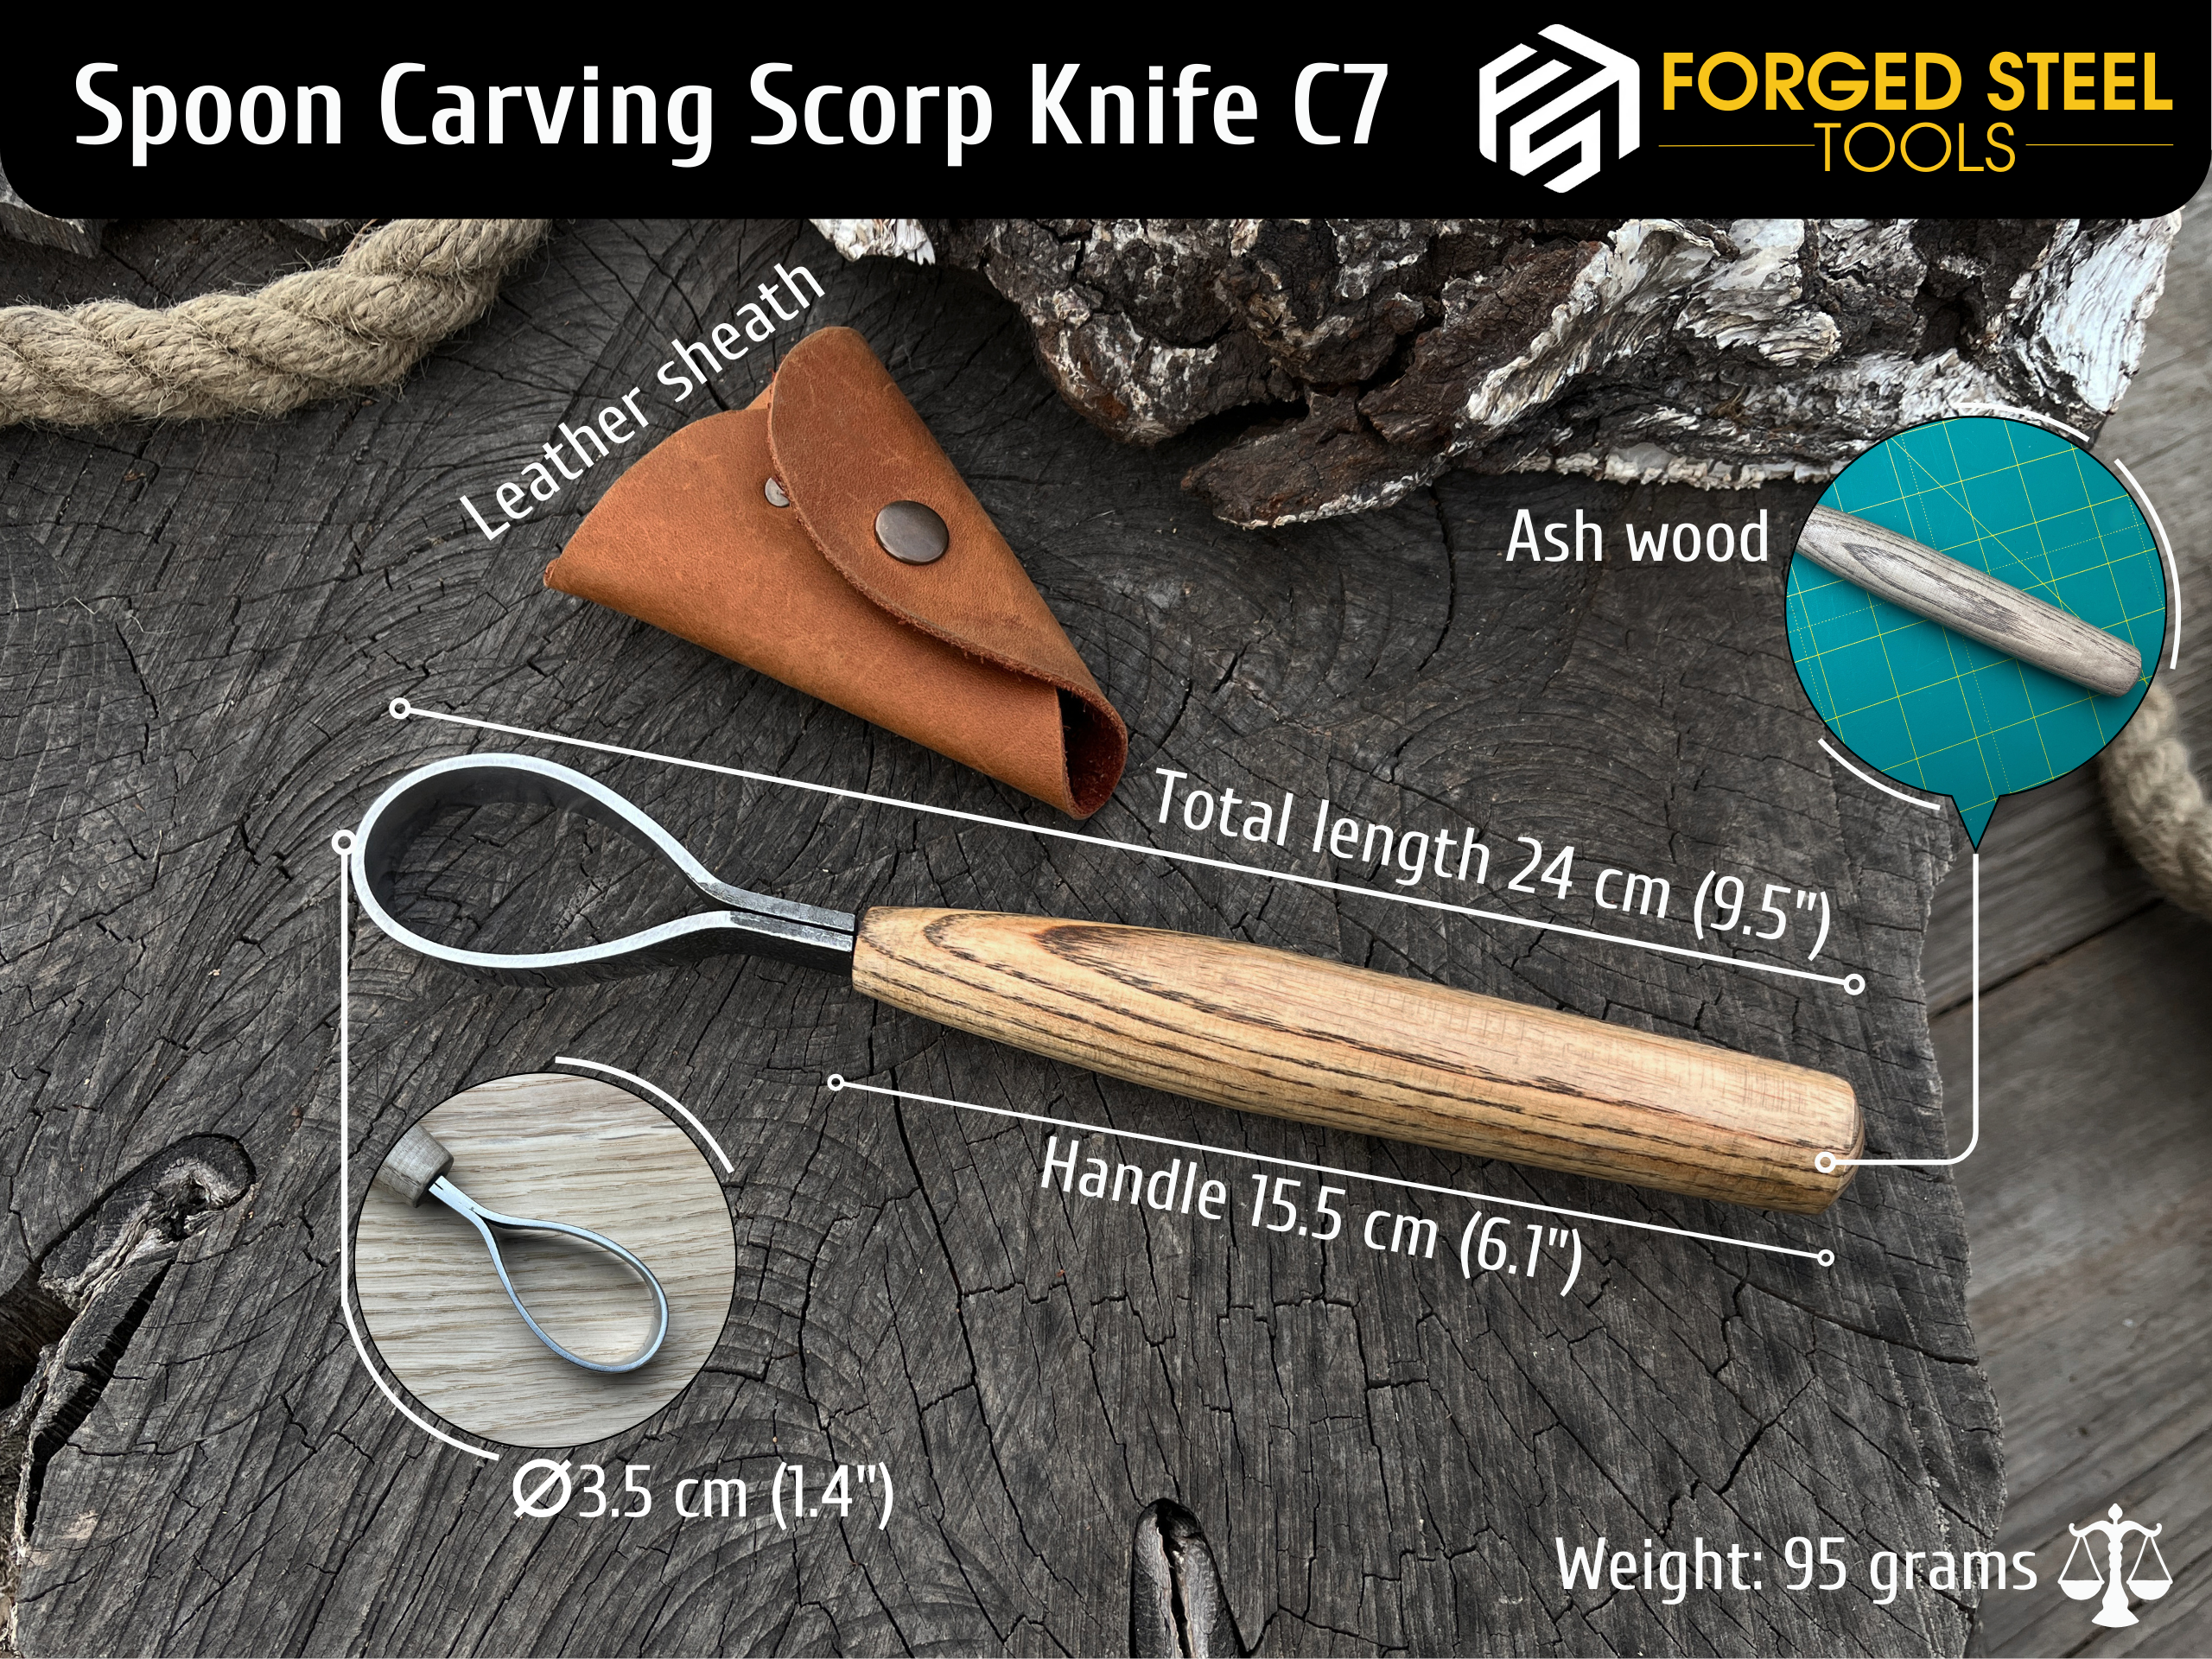 Hand-Forged Spoon Carving Scorp Knife, ⌀3.5 cm (1.4 inches)